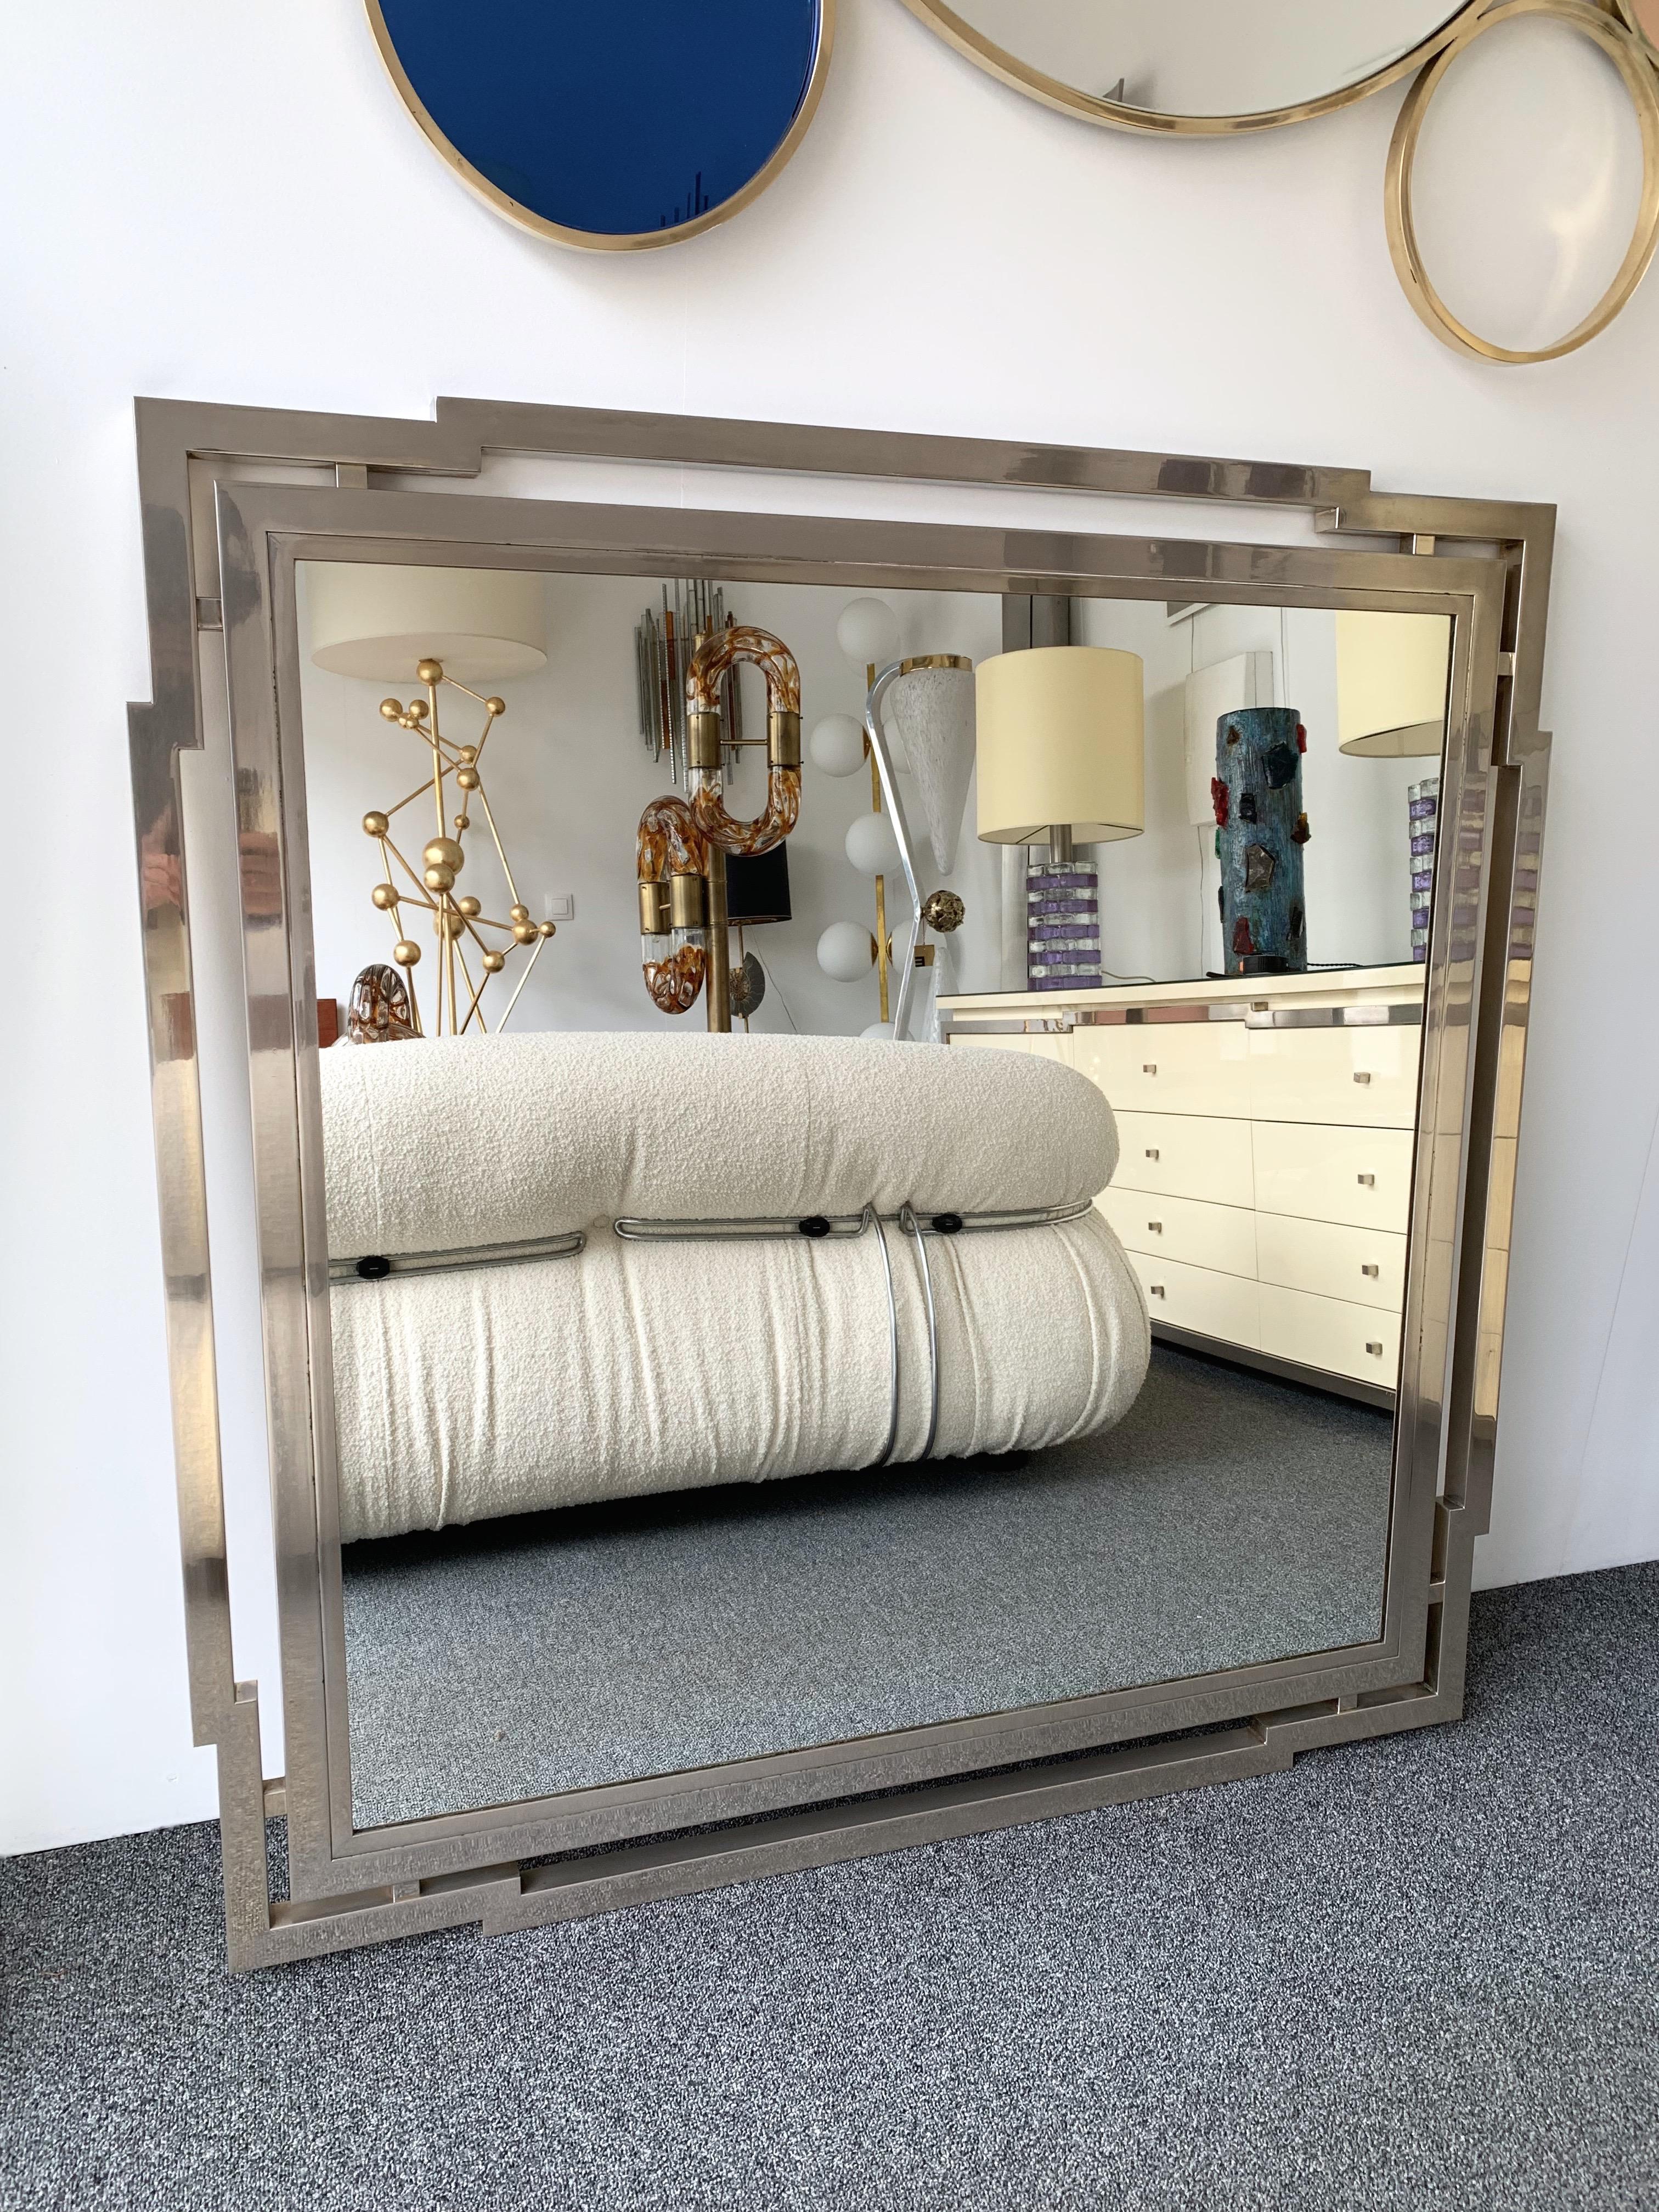 Large square geometrical wall mirror metal chrome, full heavy metal, high quality from the 1970s by Mario Sabot. Famous manufacture like Maison Jansen, Galerie Maison et Jardin, Willy Rizzo, Romeo Rega, Belgo chrome, Hollywood Regency.